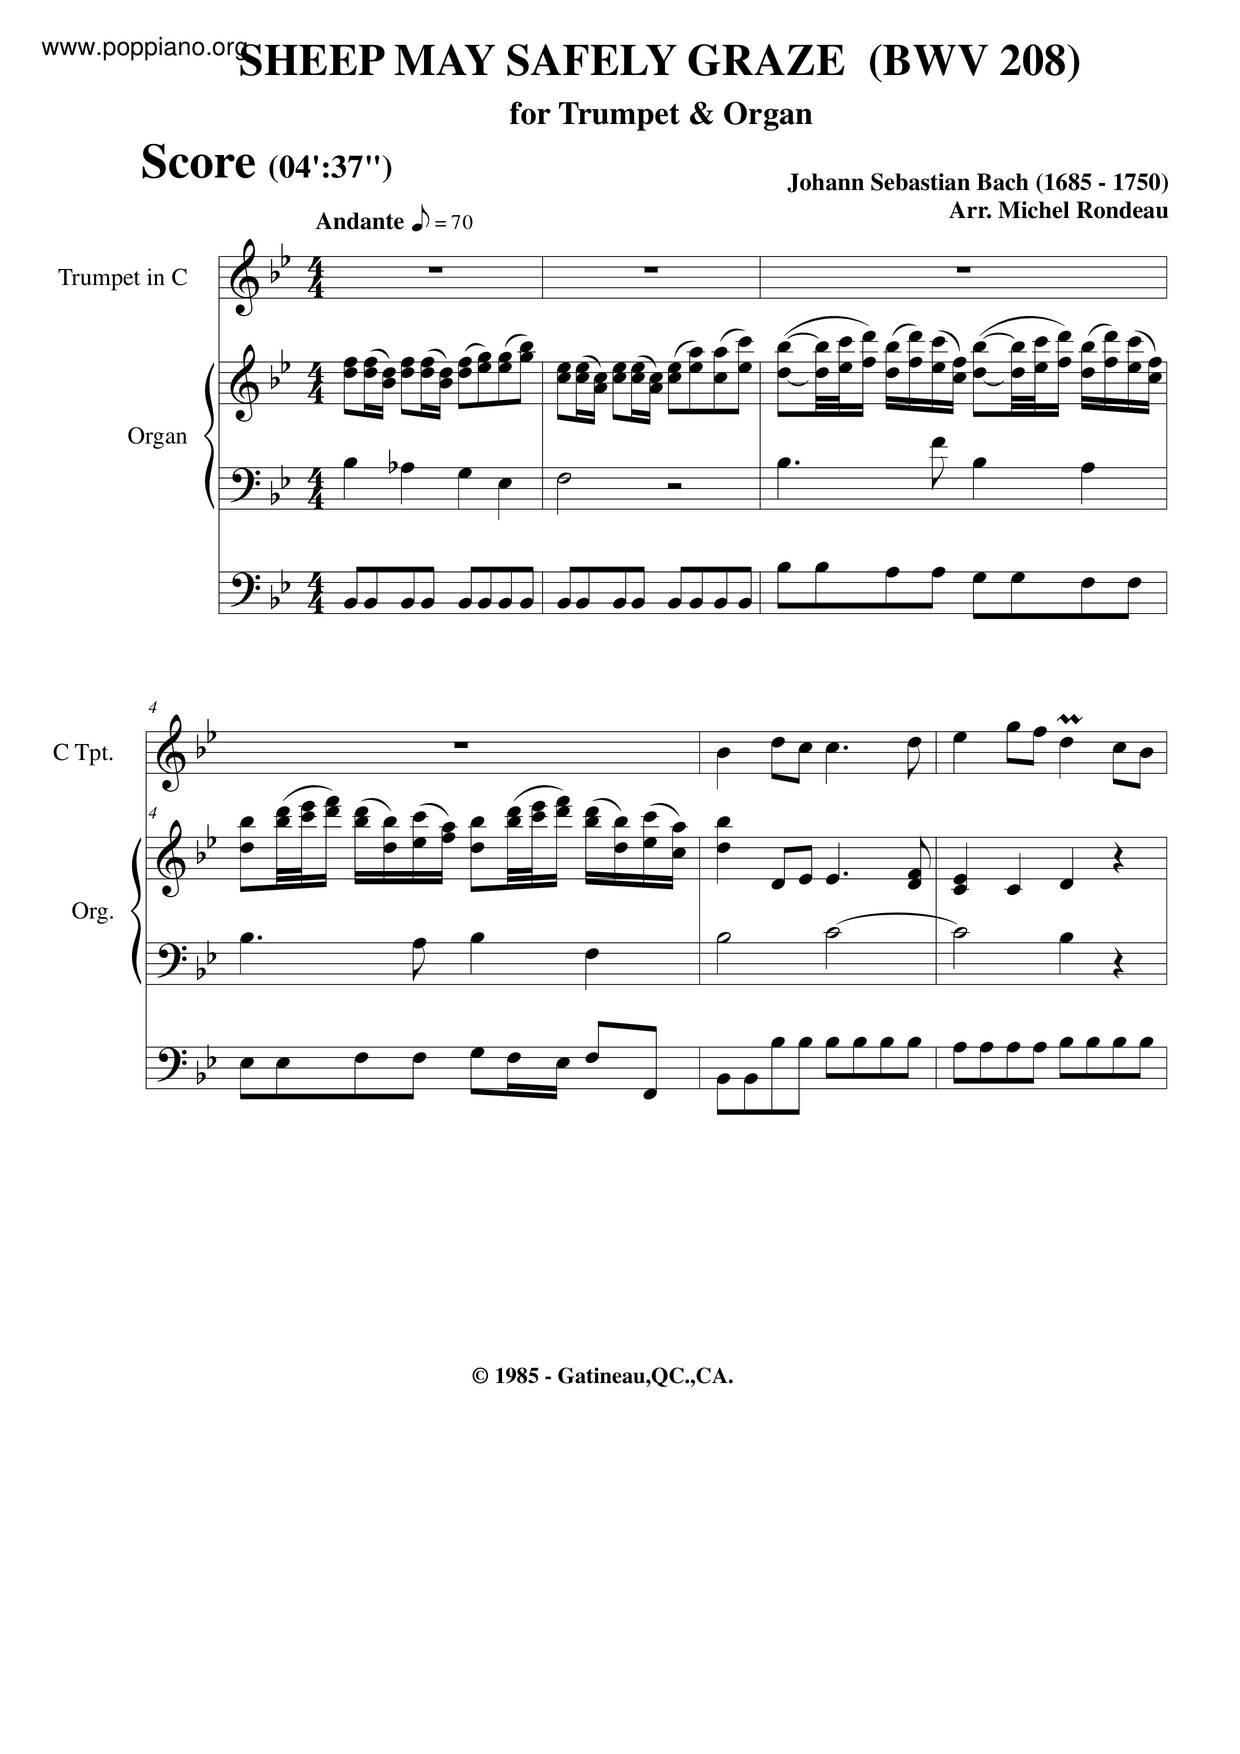 The Lively Hunt Is All My Heart's Desire, BWV 208 Score